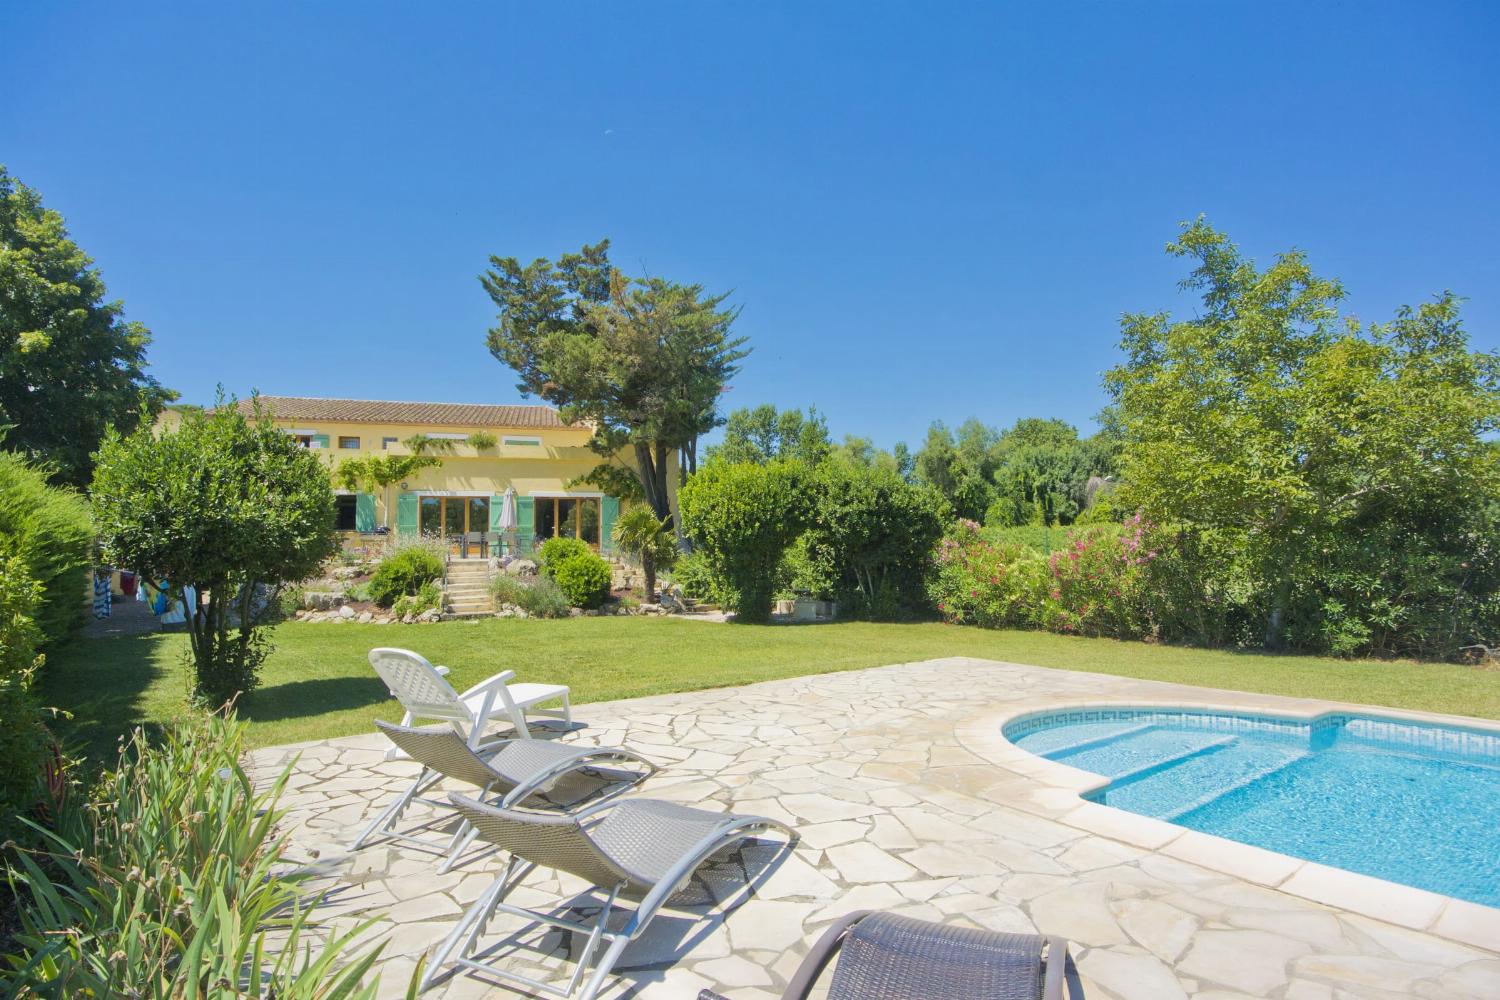 Rental home in South of France with private pool